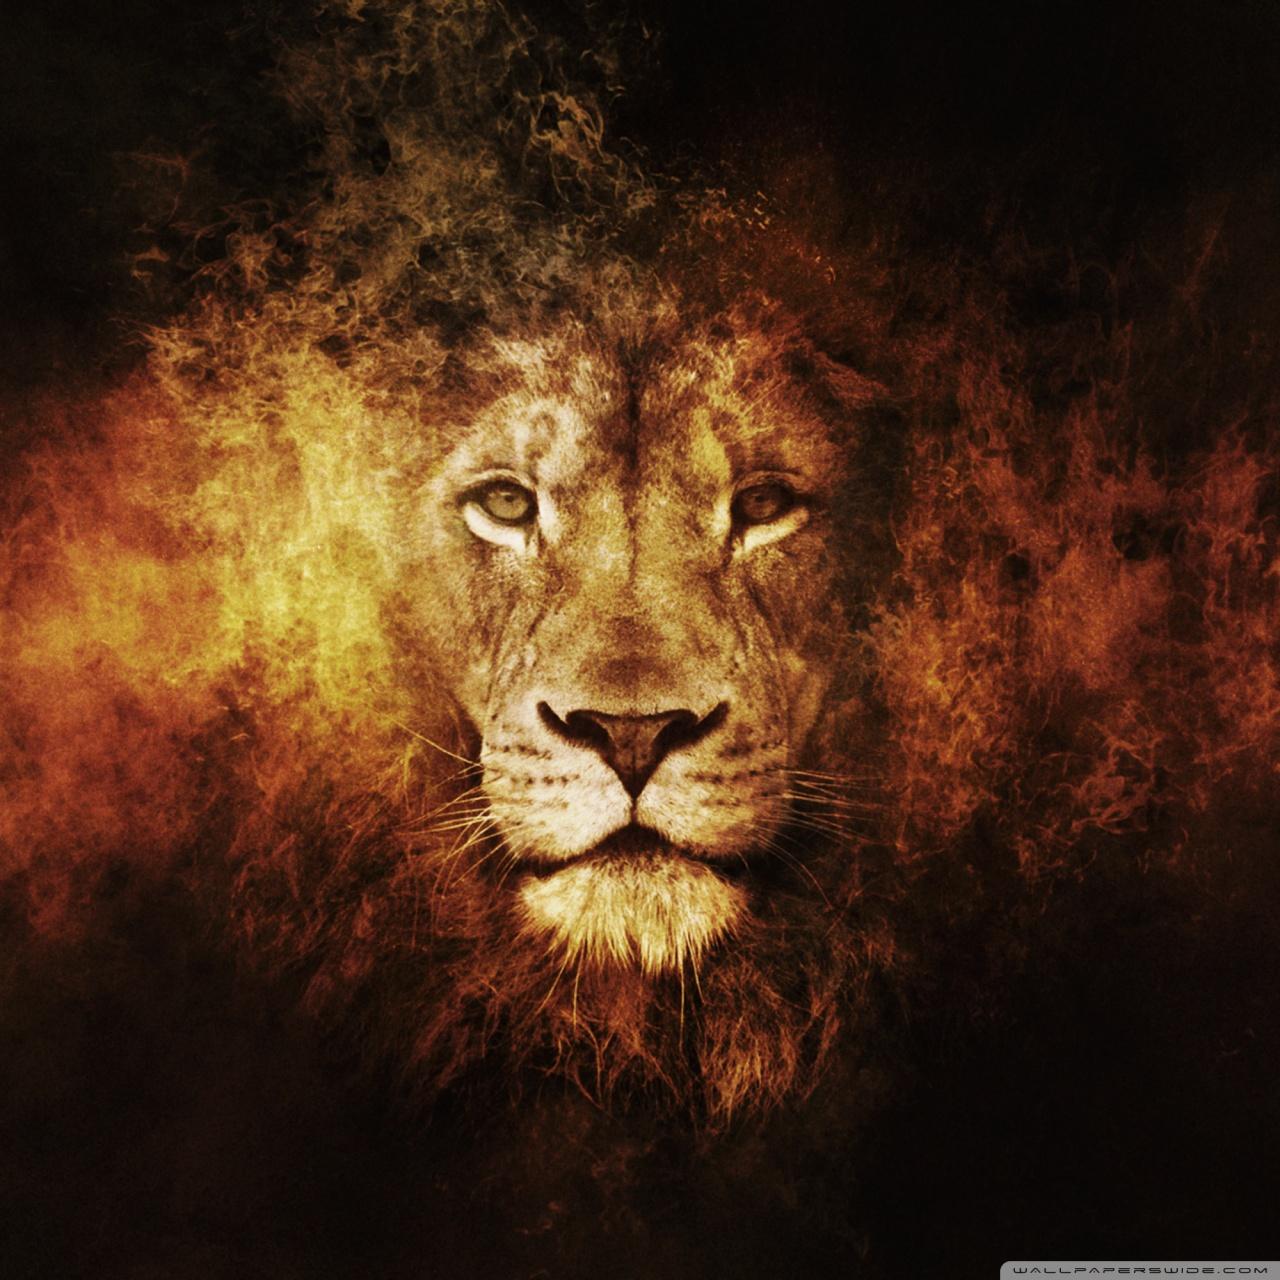 Galaxy Lion Wallpaper - Wildlife Heritage Foundation , HD Wallpaper & Backgrounds